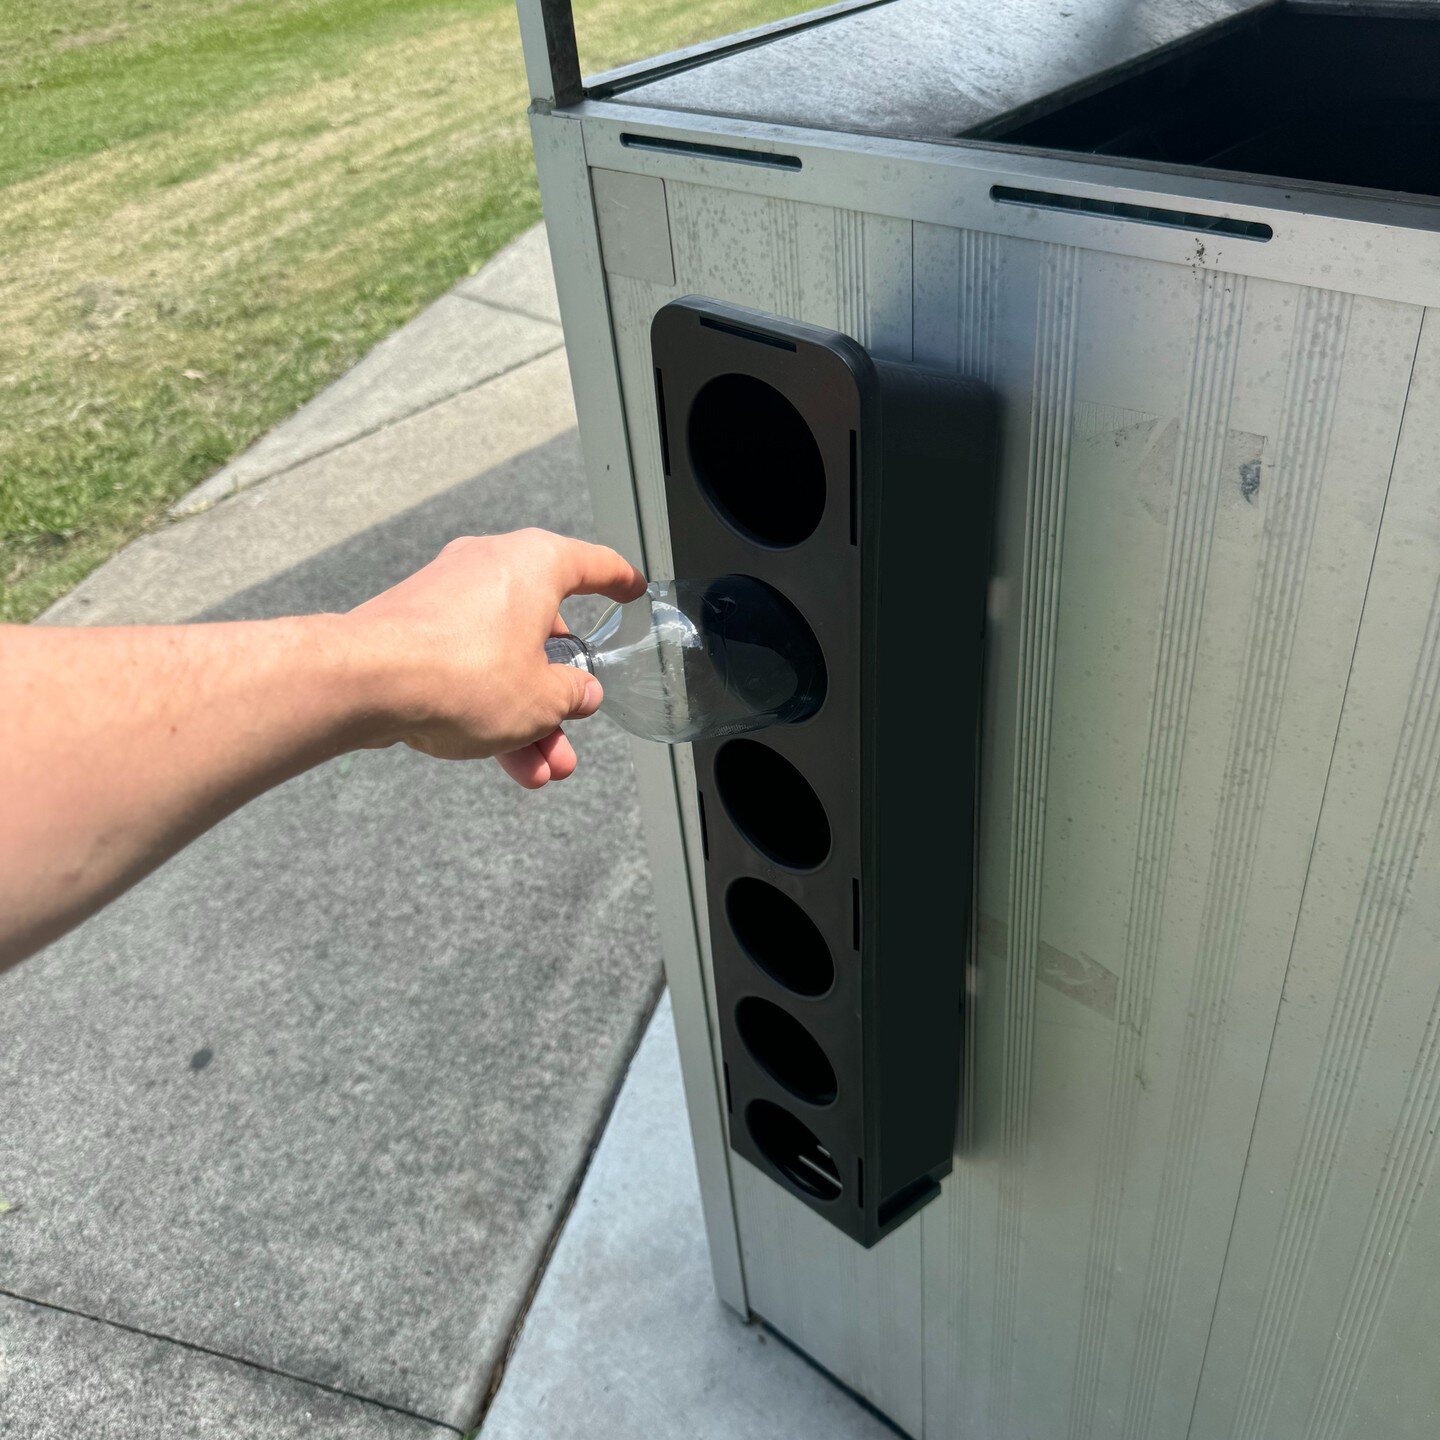 Our locally made 100% recycled plastic bin bypass units are now available for purchase. Use waste to divert waste! 

Check our store for details!